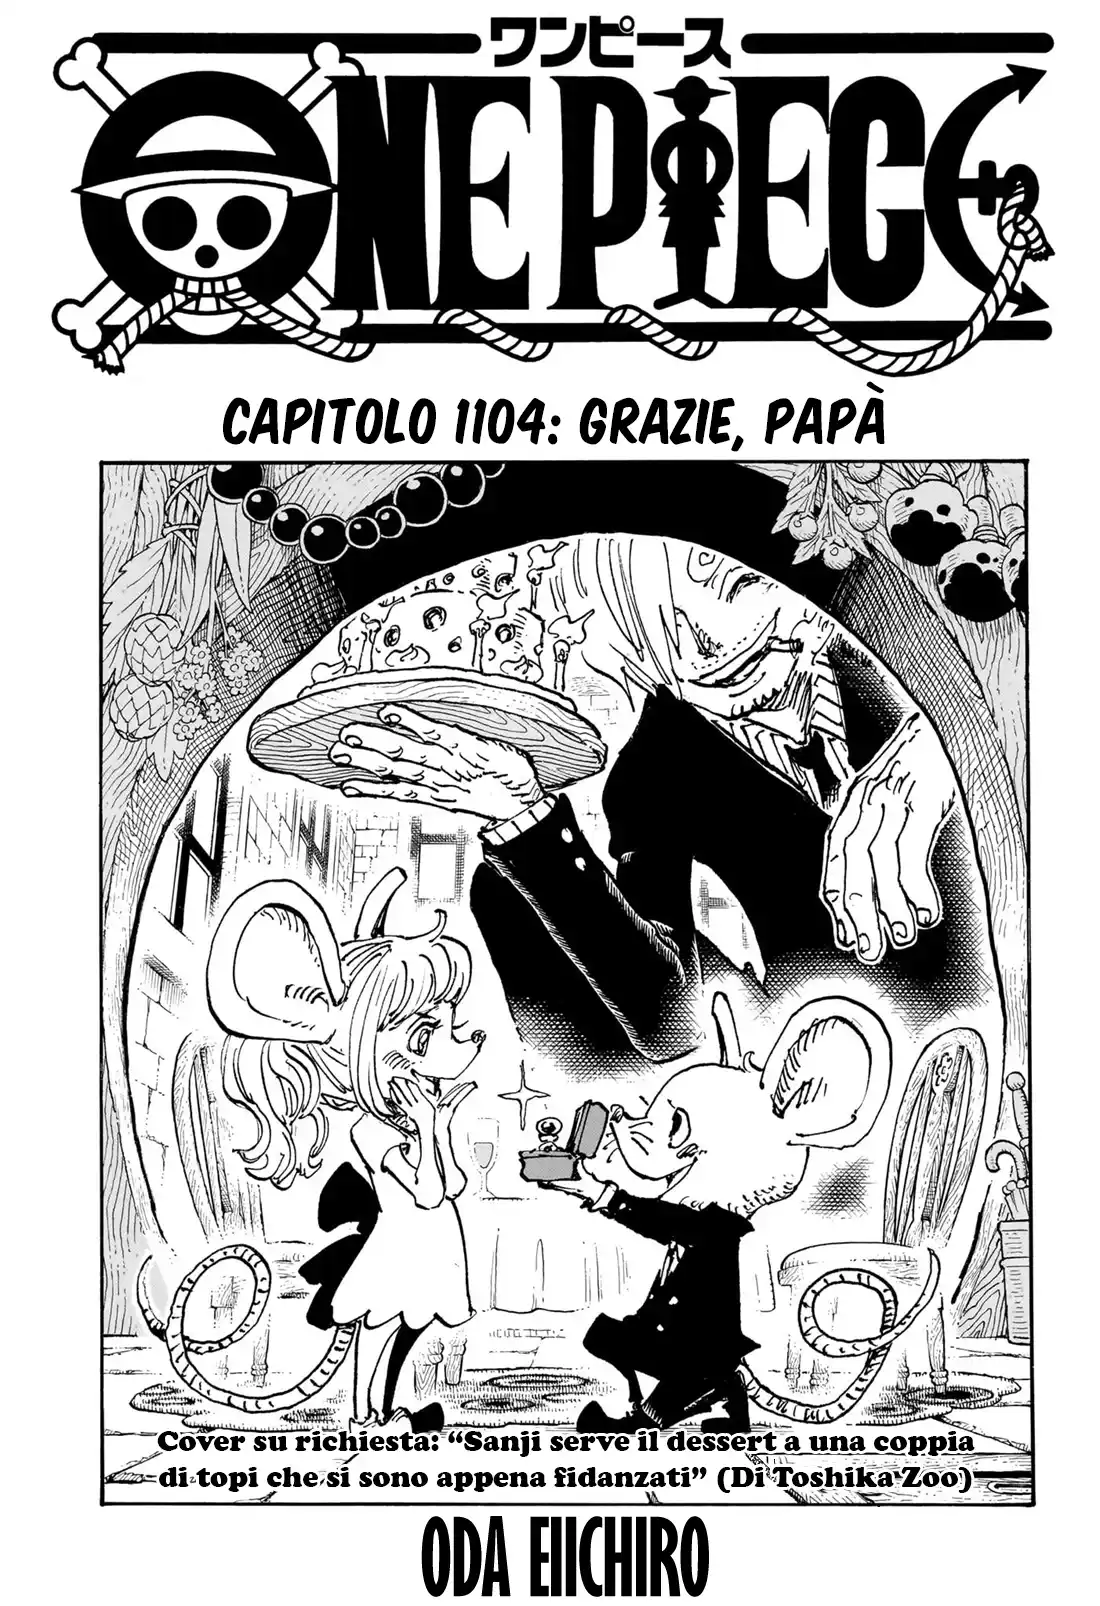 One Piece Capitolo 1104 page 2